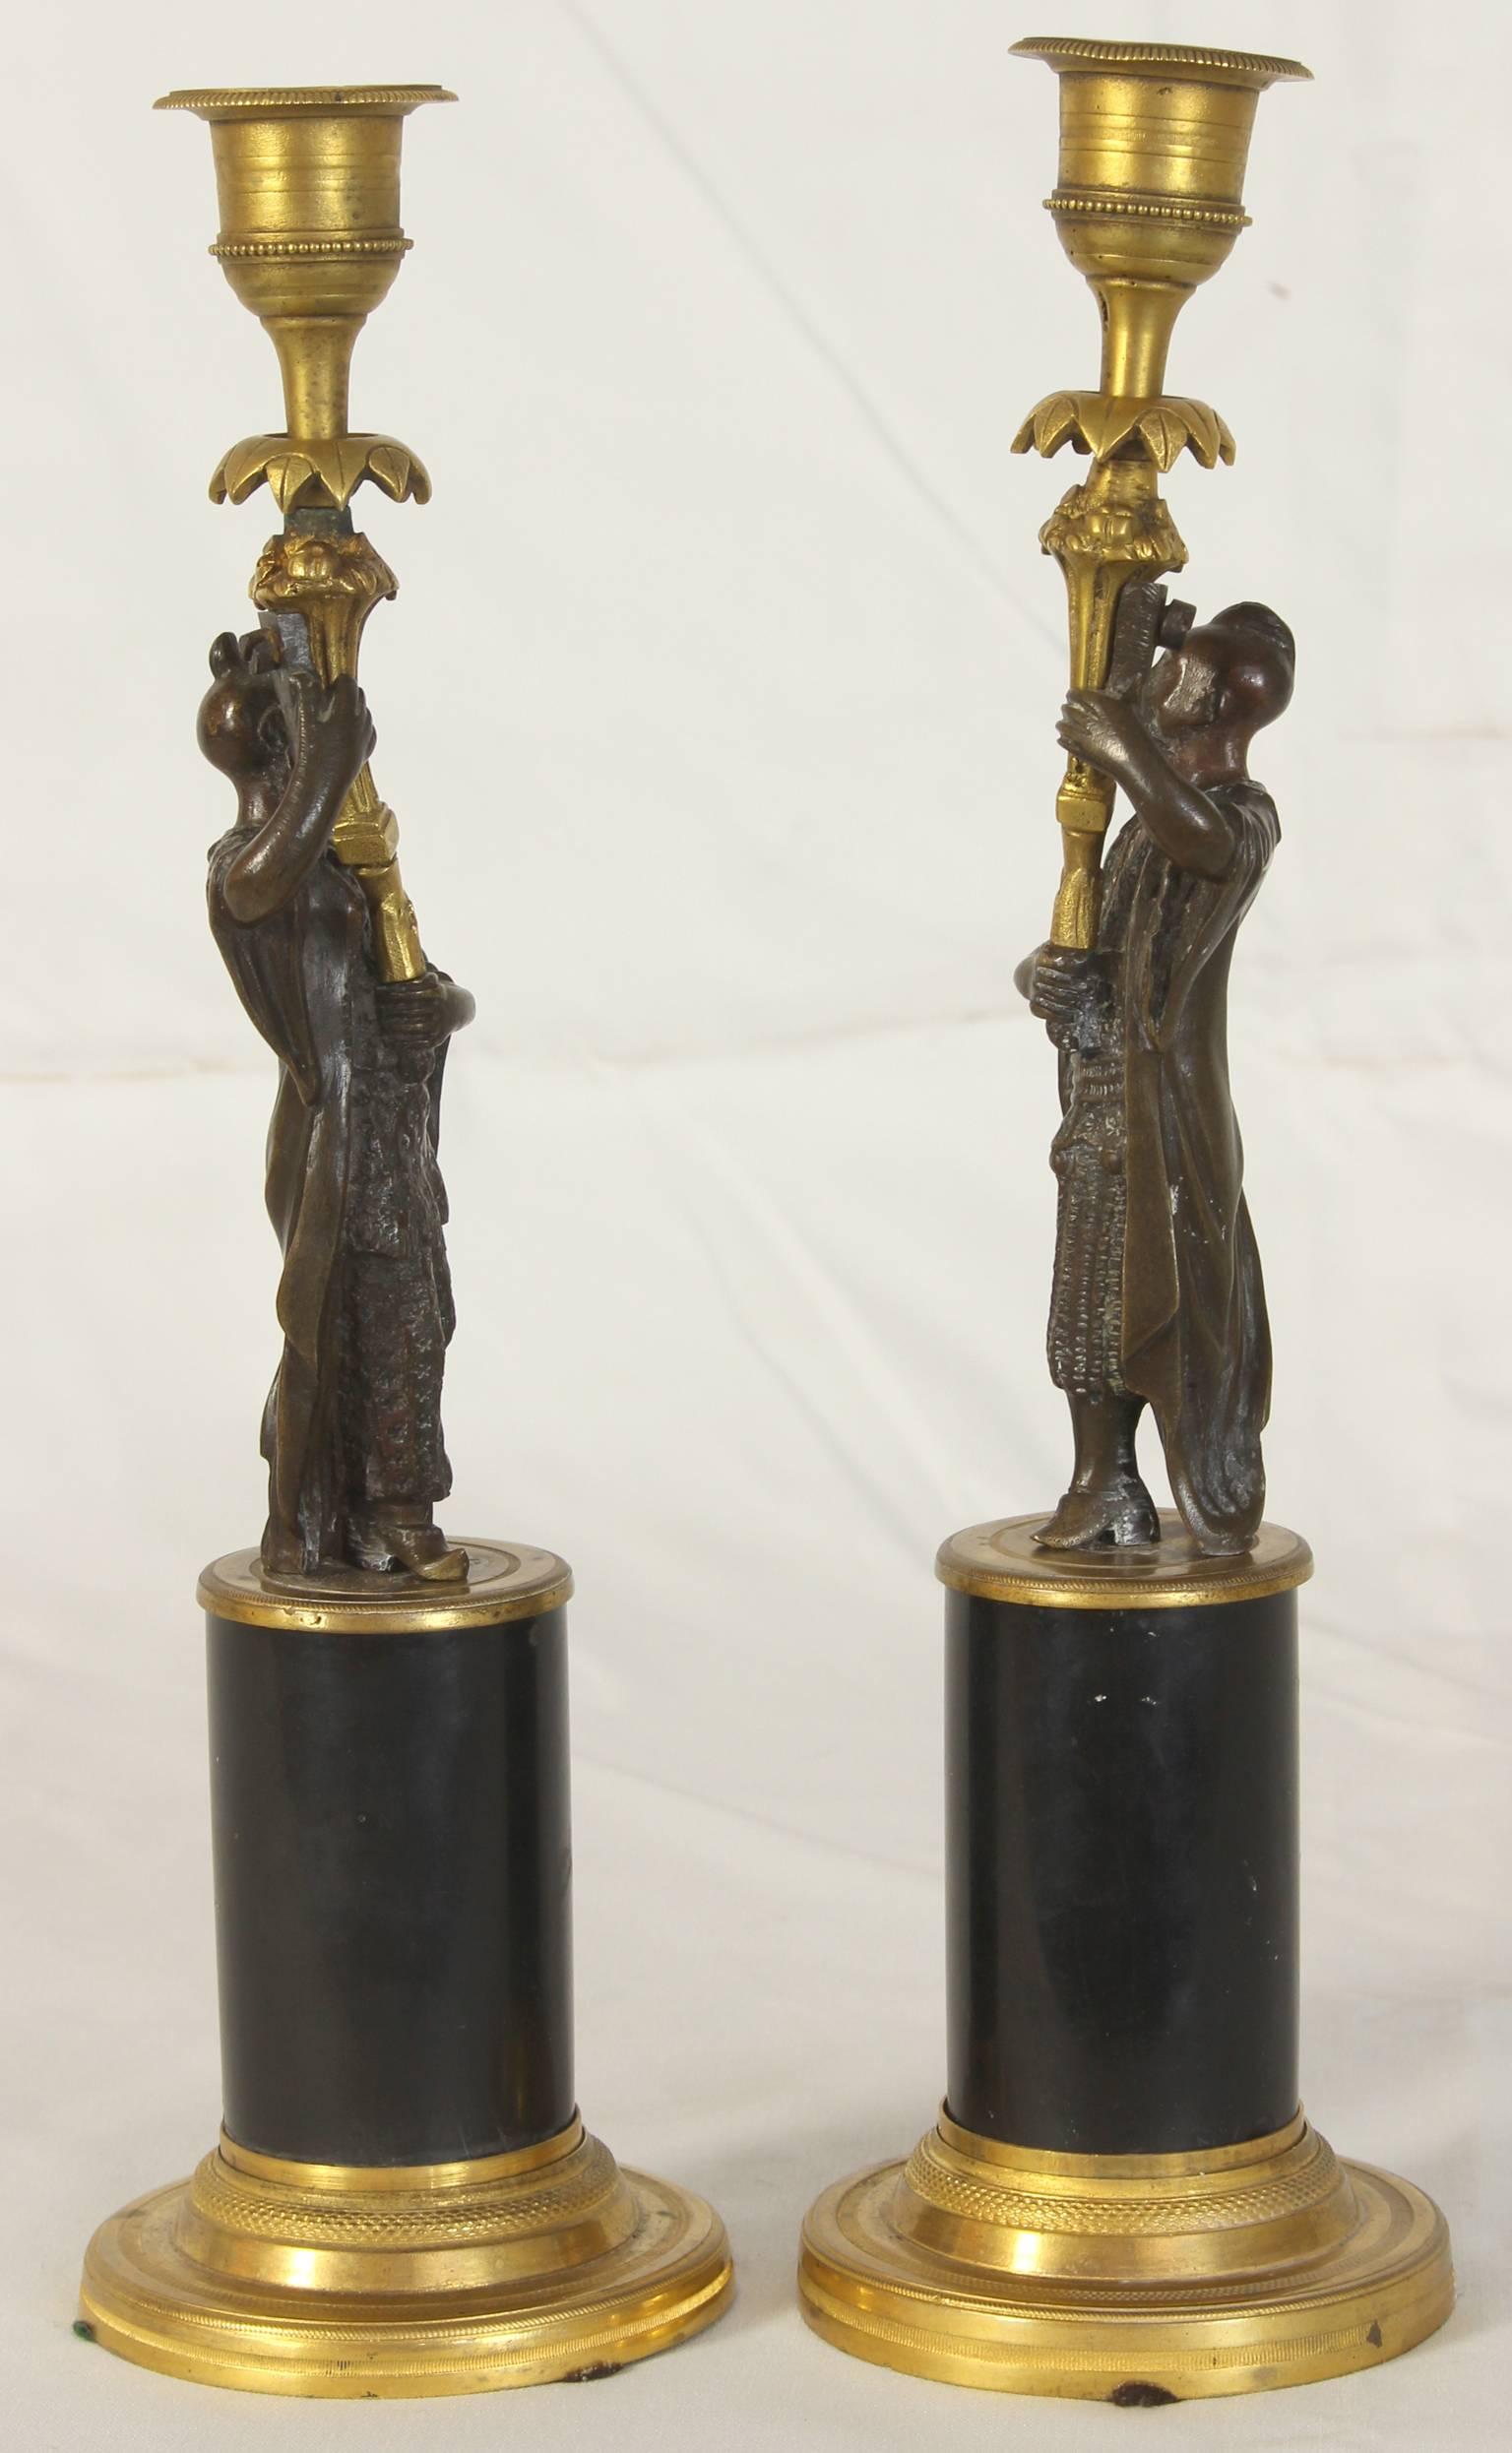 A fantastic pair of early 19th Century French gilt and patinated cast bronze Chinoiserie figural candlesticks on black marble cylindrical bases.